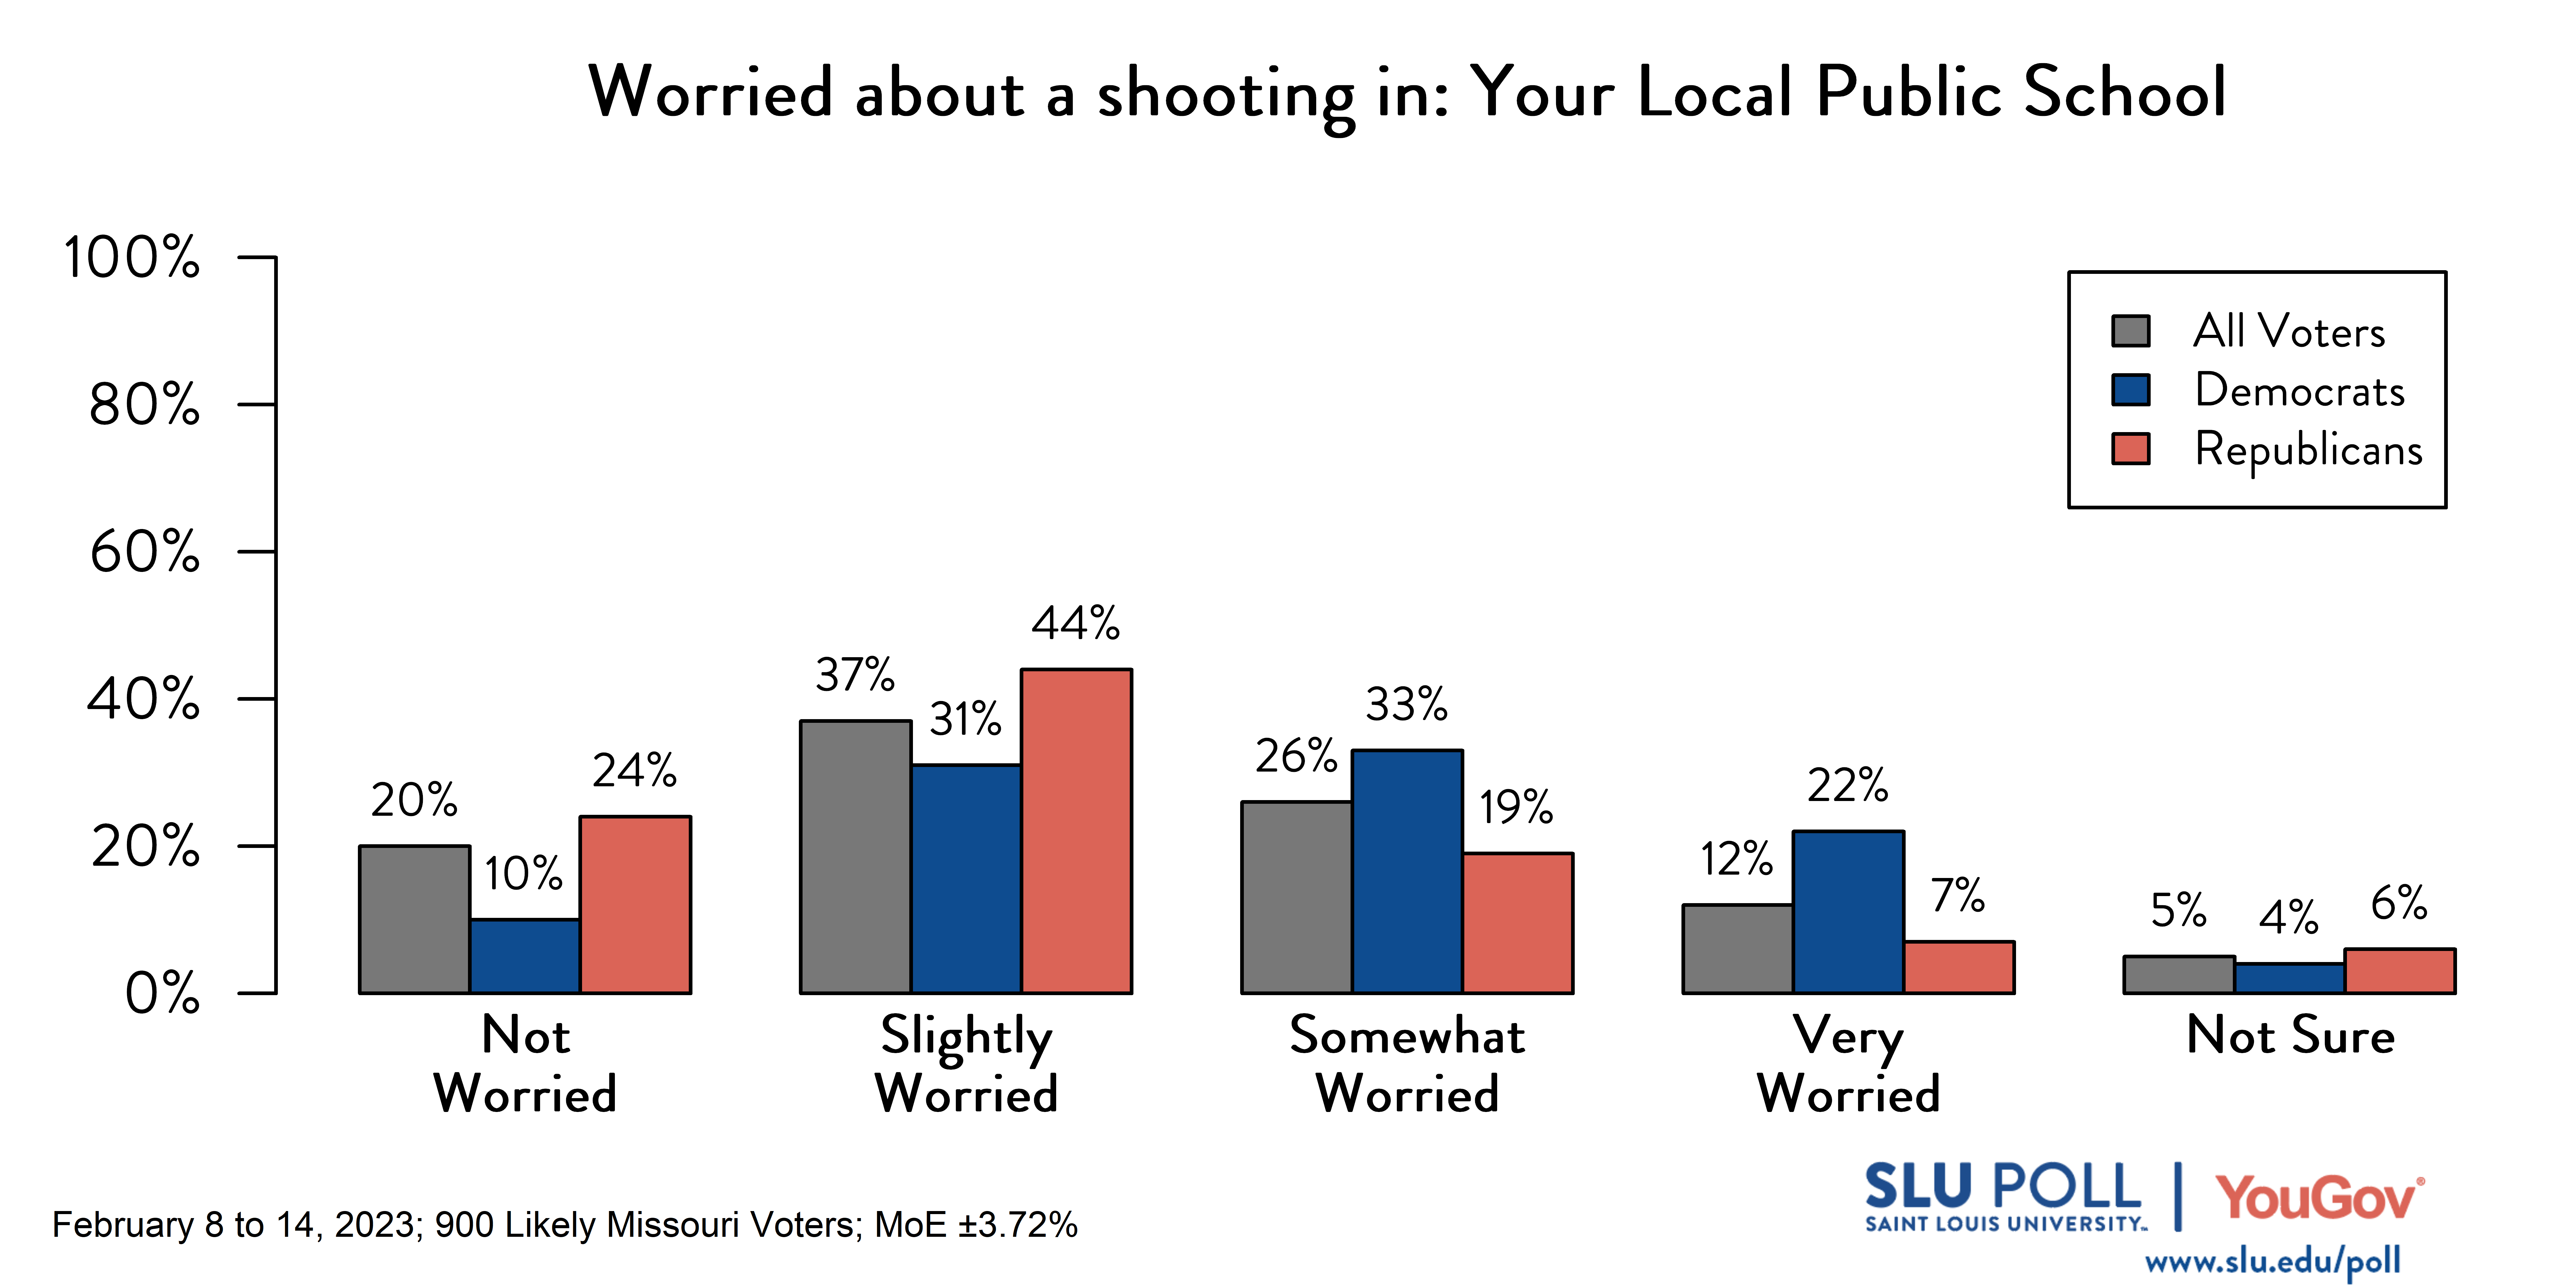 Likely voters' responses to 'How worried are you about the possibility of a shooting ever happening: in your local public school?': 20% Not worried, 37% Slightly worried, 26% Somewhat worried, 12% Very worried, and 5% Not sure. Democratic voters' responses: ' 10% Not worried, 31% Slightly worried, 33% Somewhat worried, 22% Very worried, and 4% Not sure. Republican voters' responses: 24% Not worried, 44% Slightly worried, 19% Somewhat worried, 7% Very worried, and 6% Not sure.